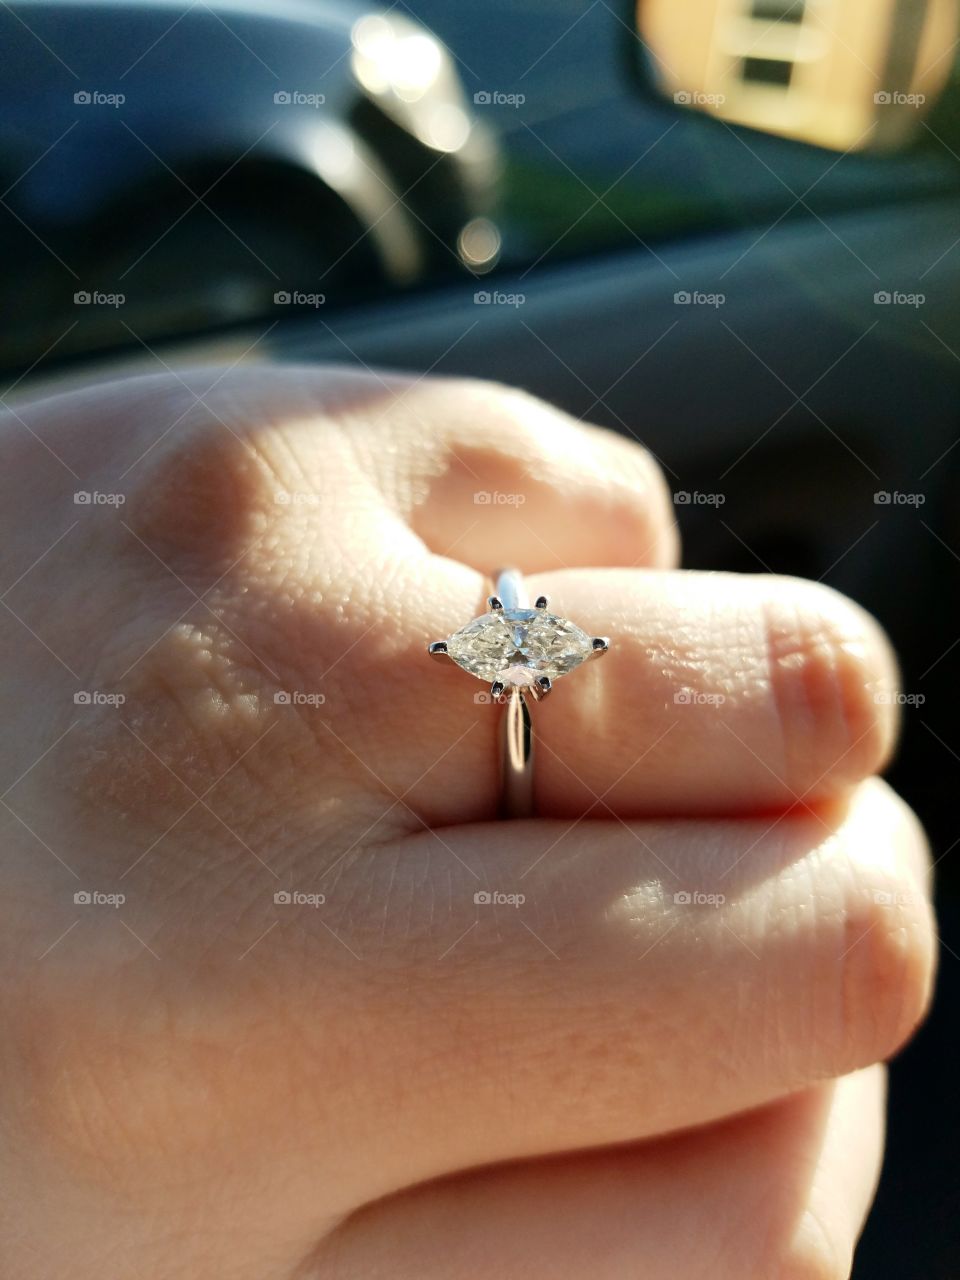 A macro shot of a hand wearing an engagement ring illuminated by sunlight.